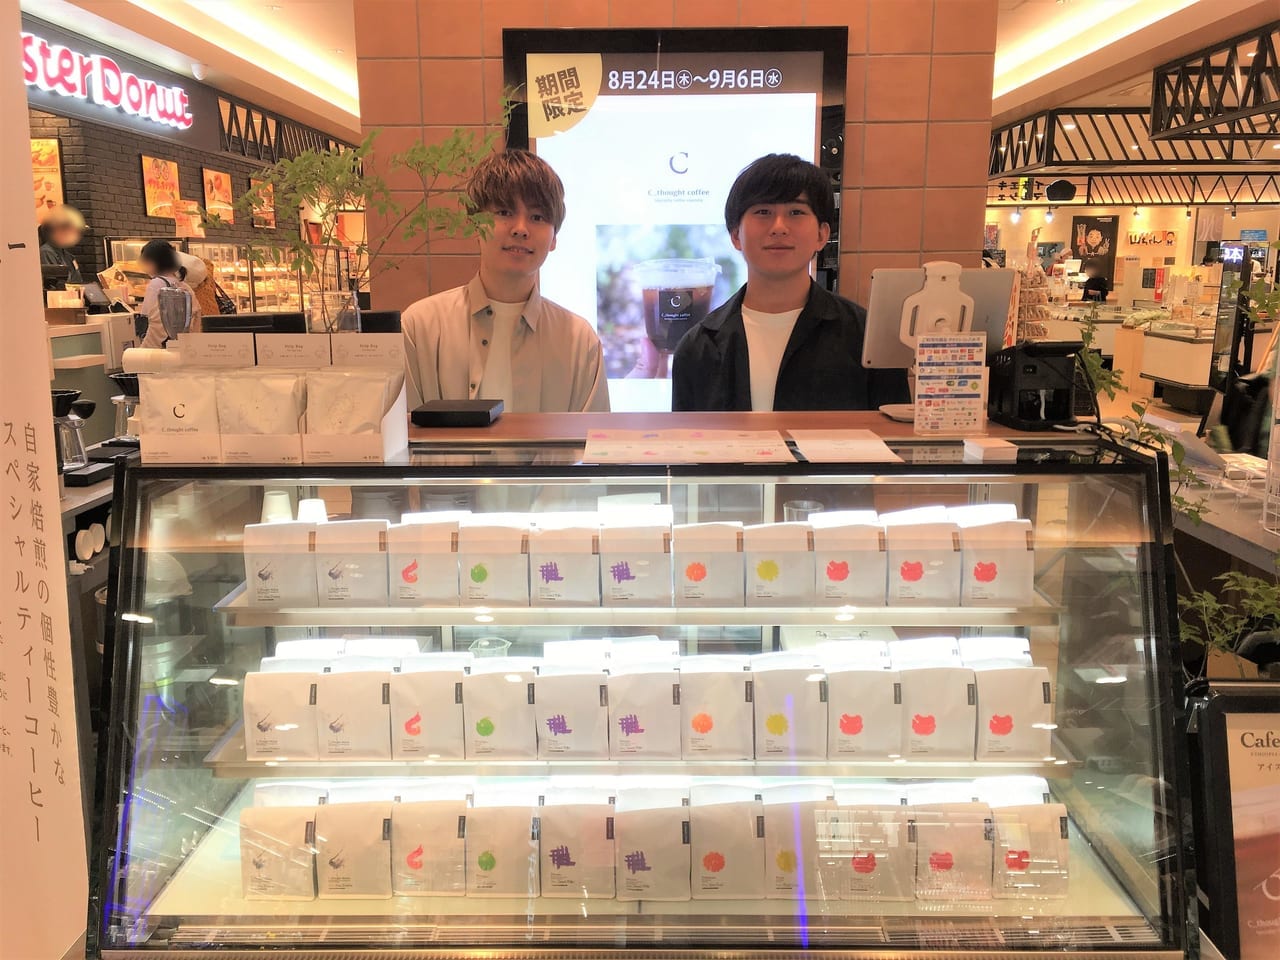 c_thought coffee　シーソーコーヒー出店のお二人